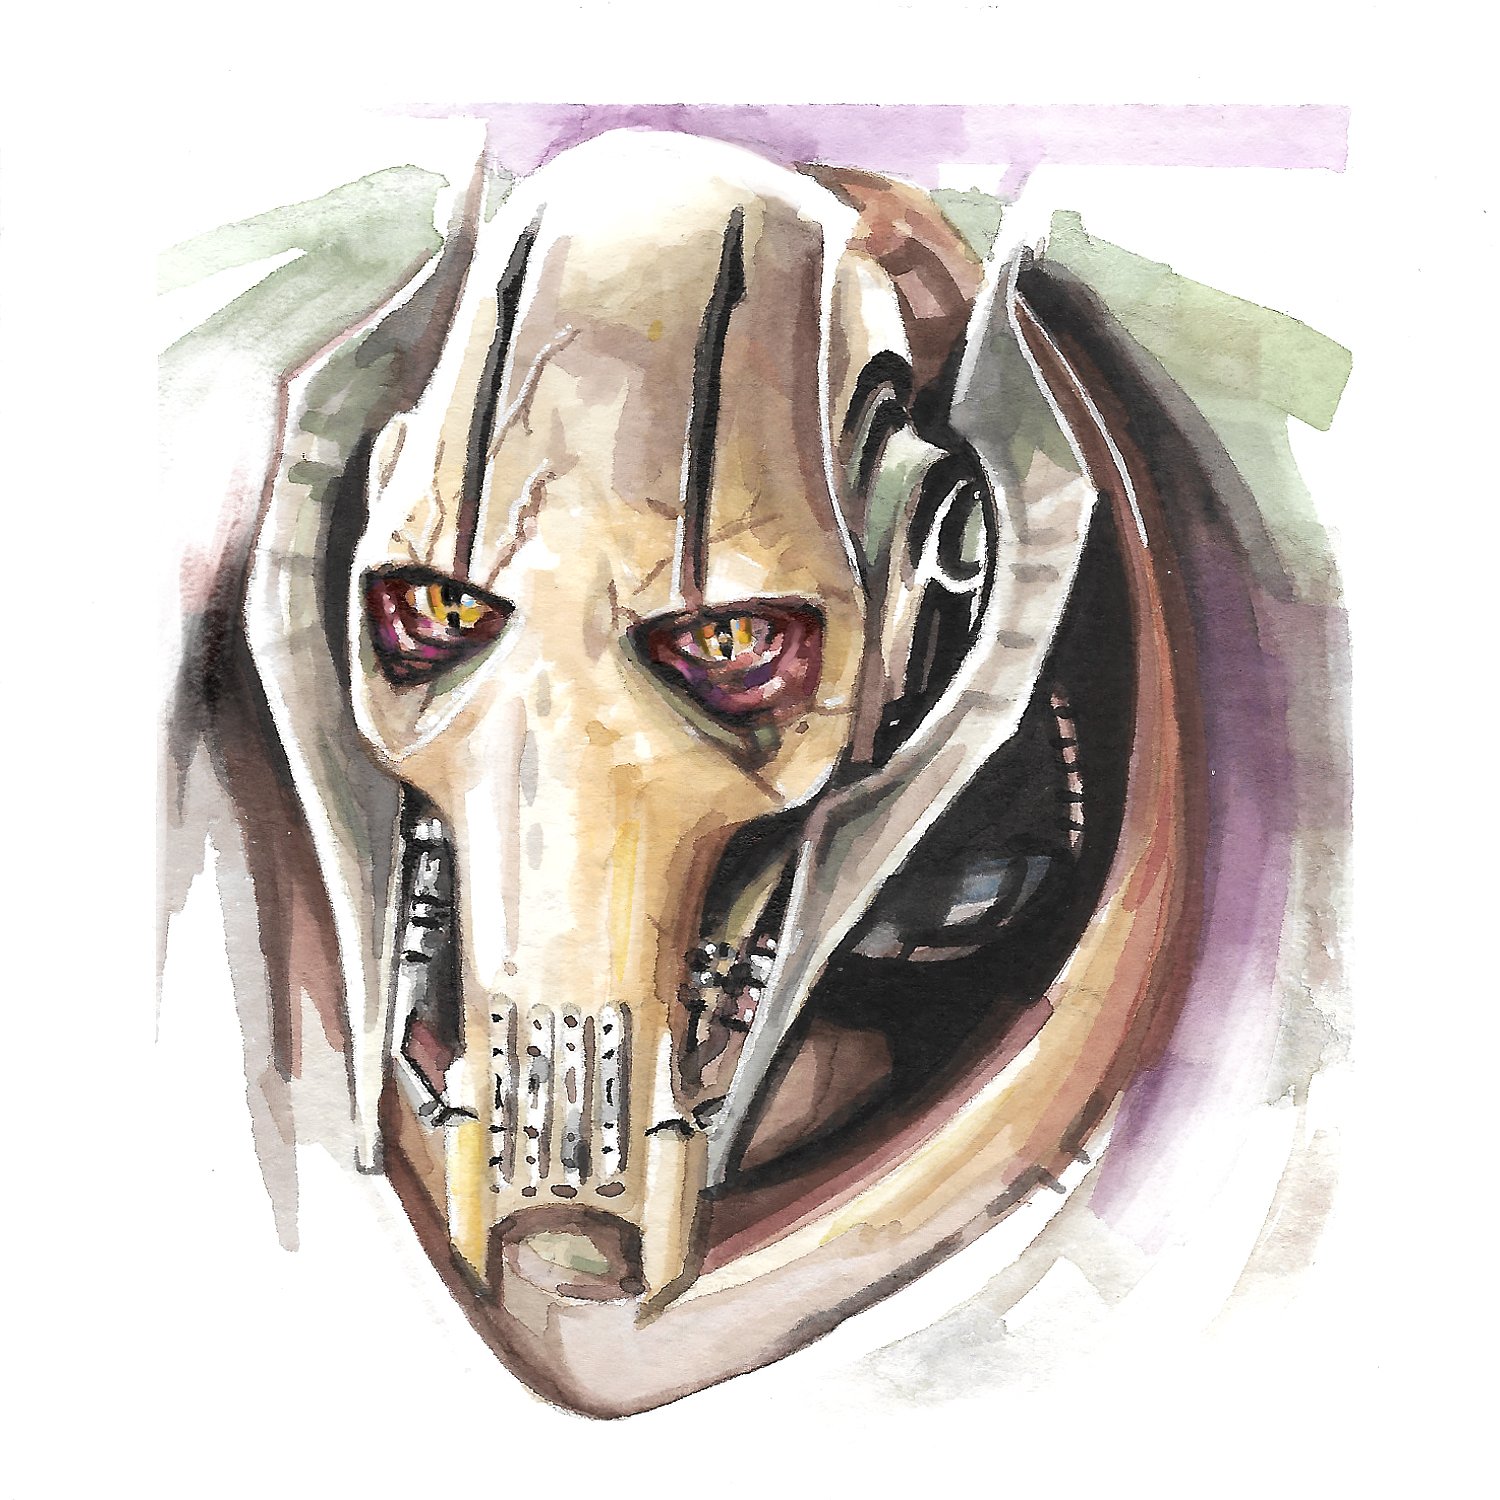 Image of General Grievous